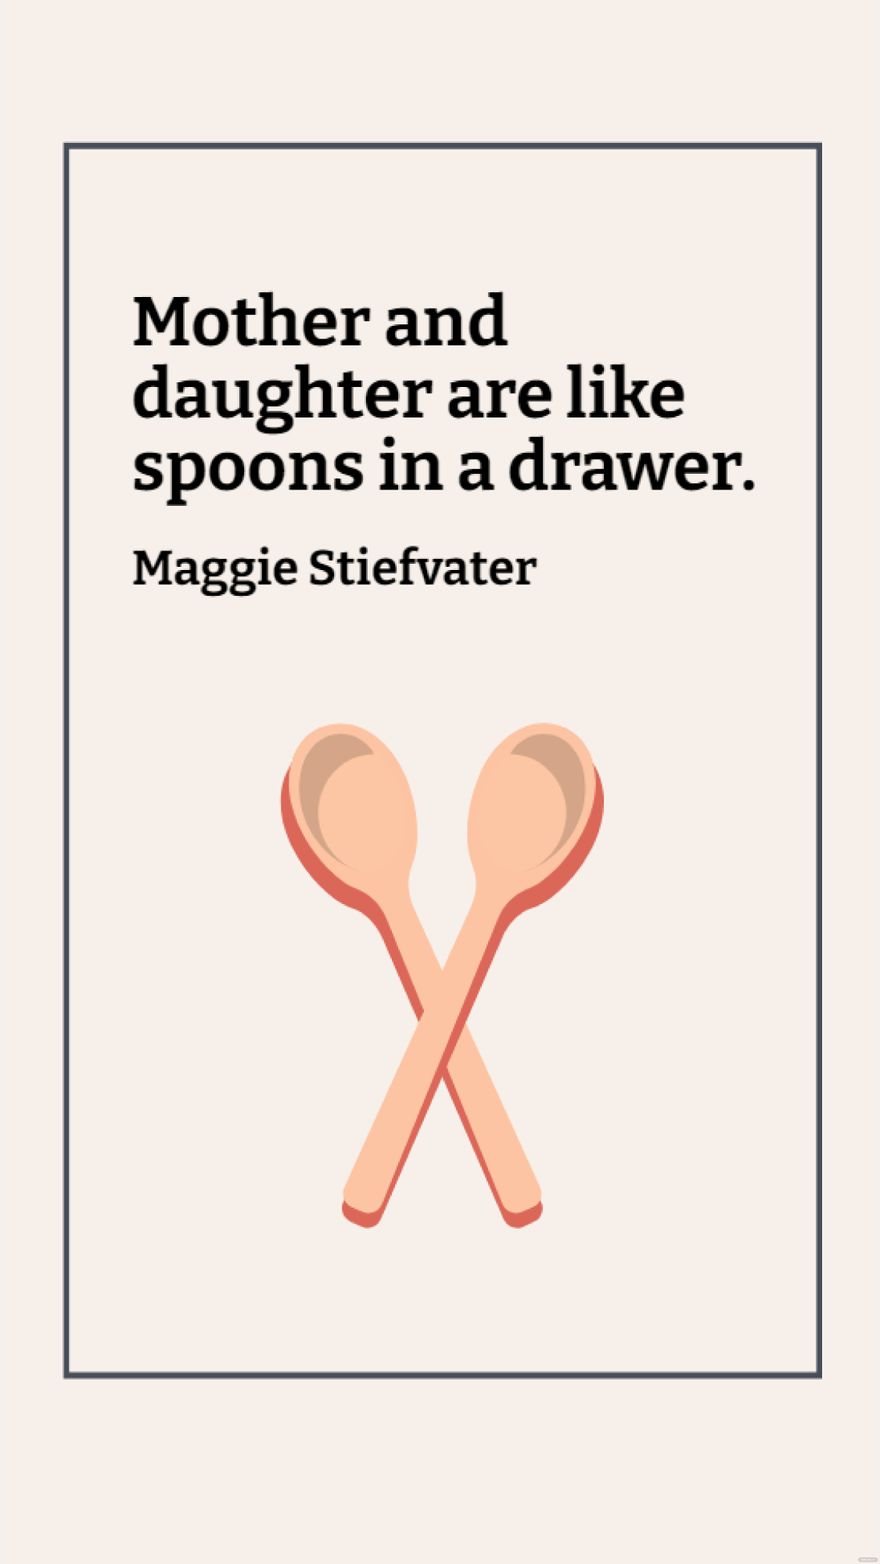 Maggie Stiefvater - Mother and daughter are like spoons in a drawer.